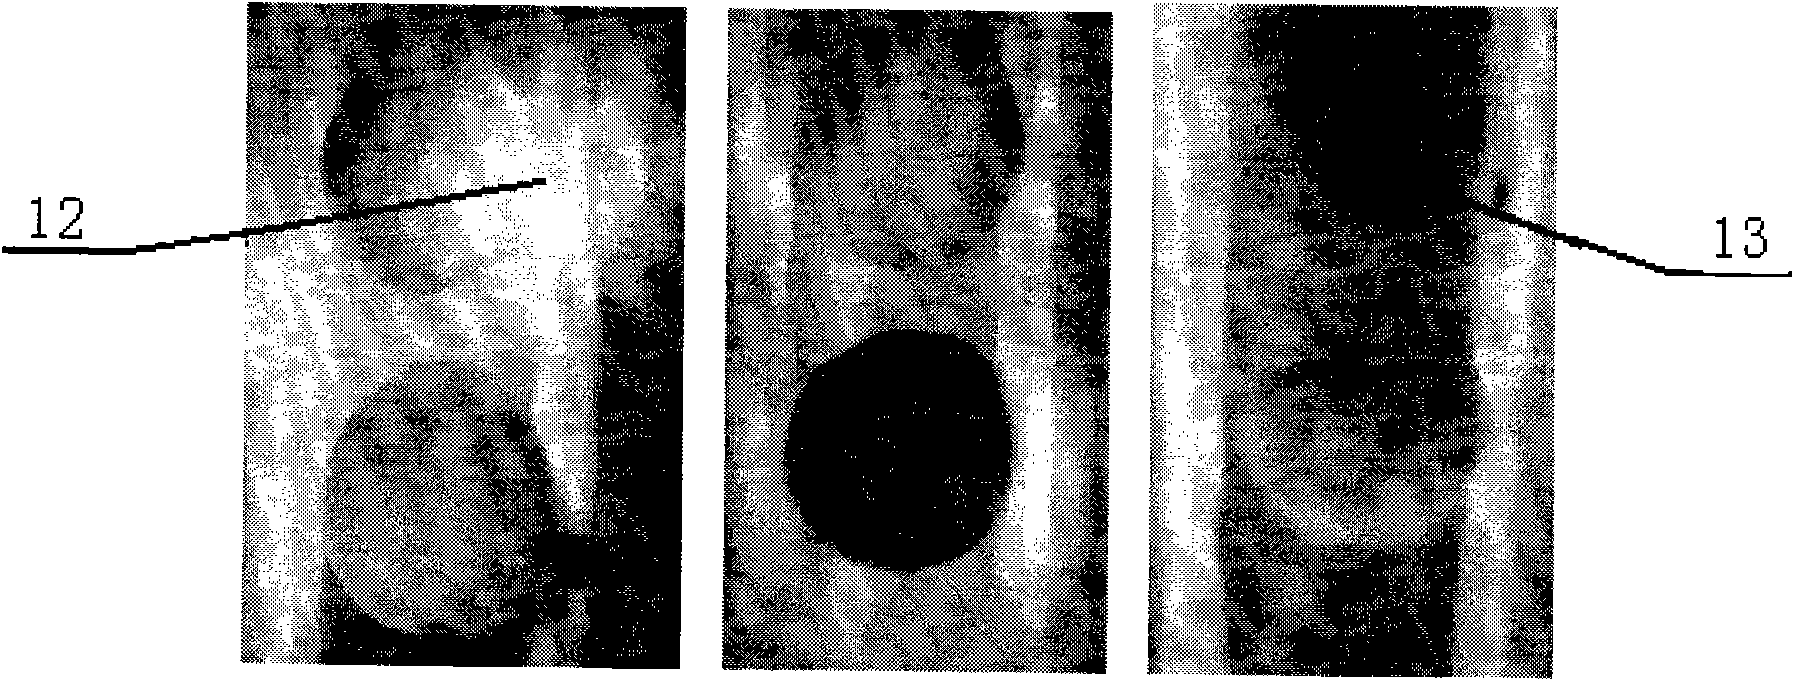 Navel orange surface drying monitoring method and device based on infrared thermal imaging technology